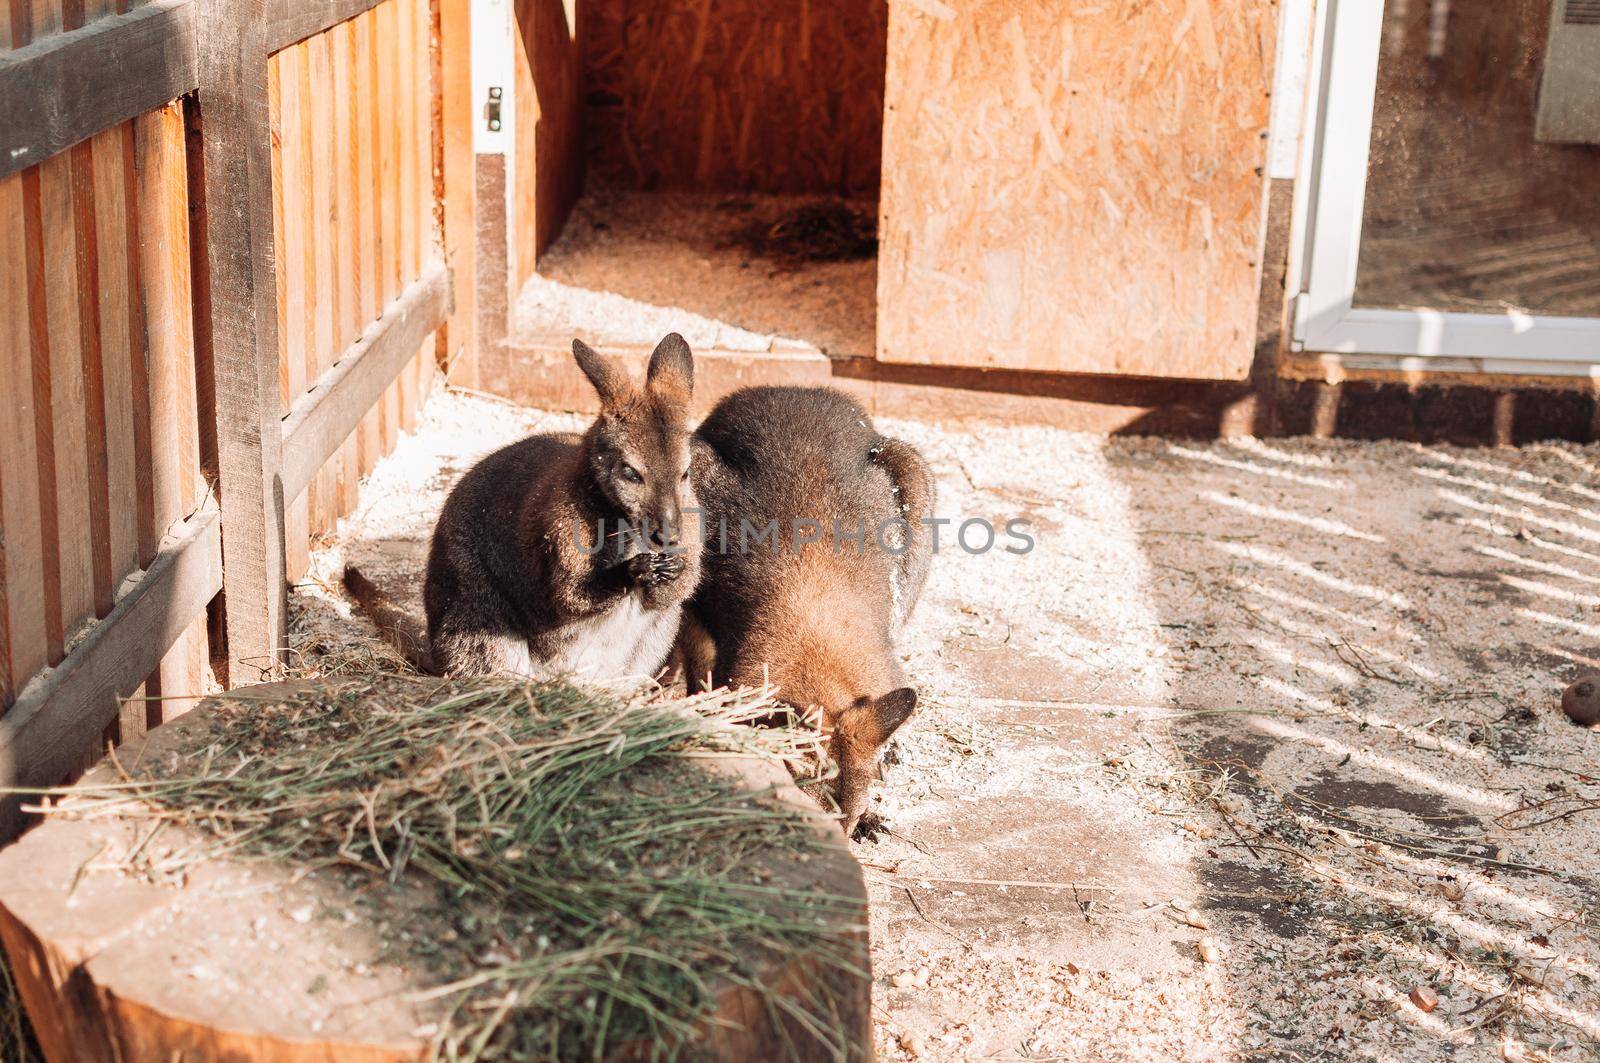 two baby kangaroos stand in a paddock near a haystack. Mammals live in the family zoo. by Alla_Morozova93